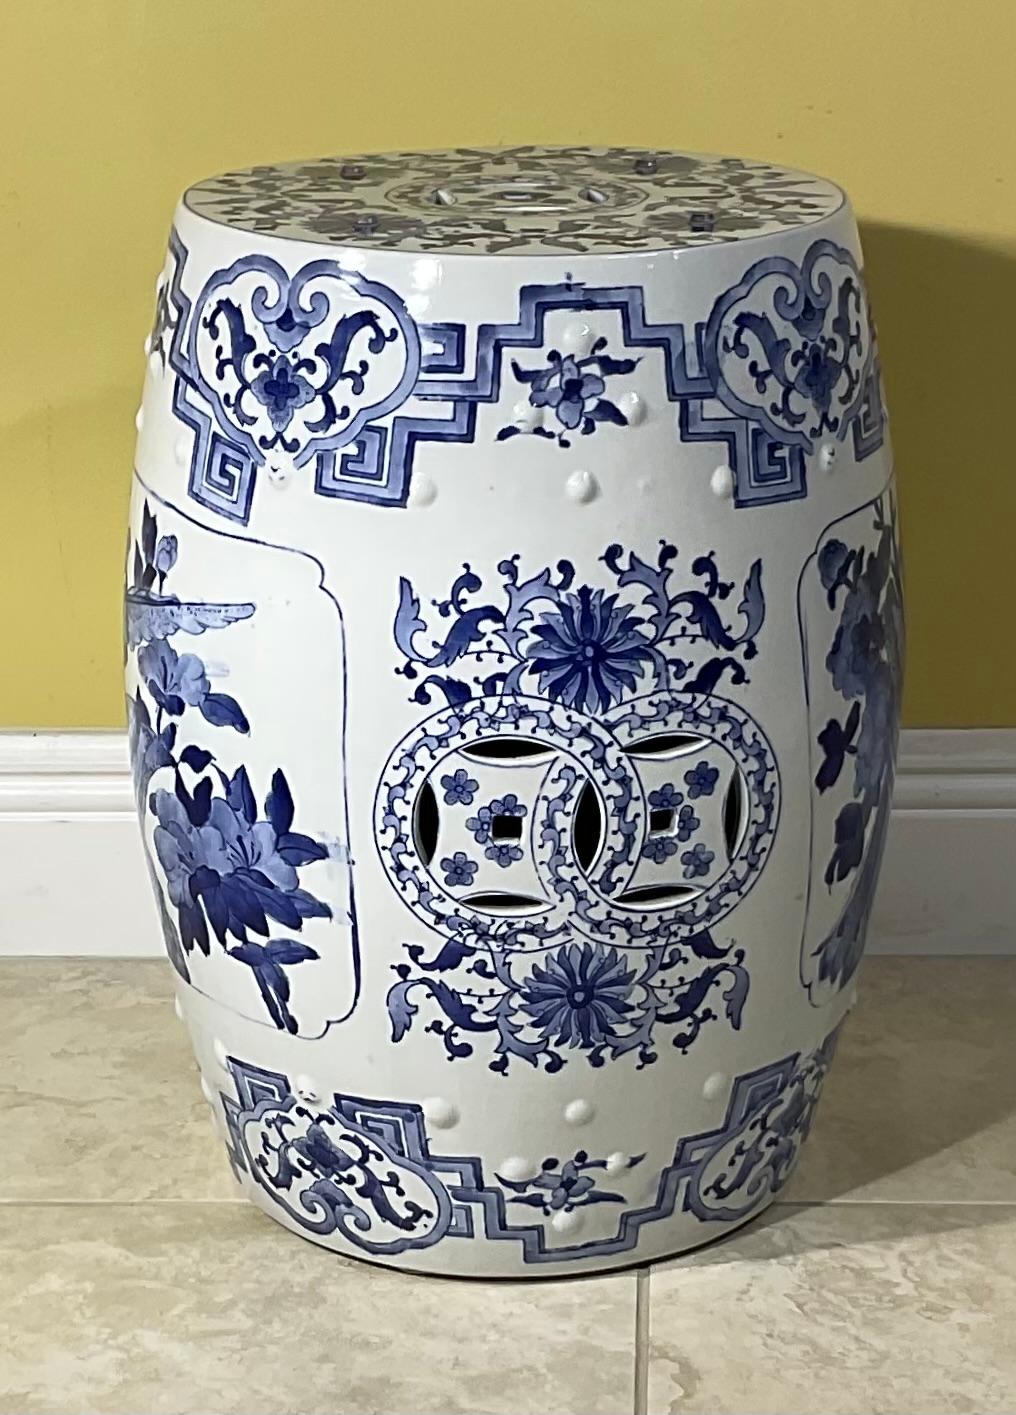 Asian ceramic garden seat or end table in blue and white floral motif. Blue and white Chinese style ceramic garden stool with hand-painted striking floral chinoiserie floral art work. Great to use indoor or outdoor as a stool or stand for plants.